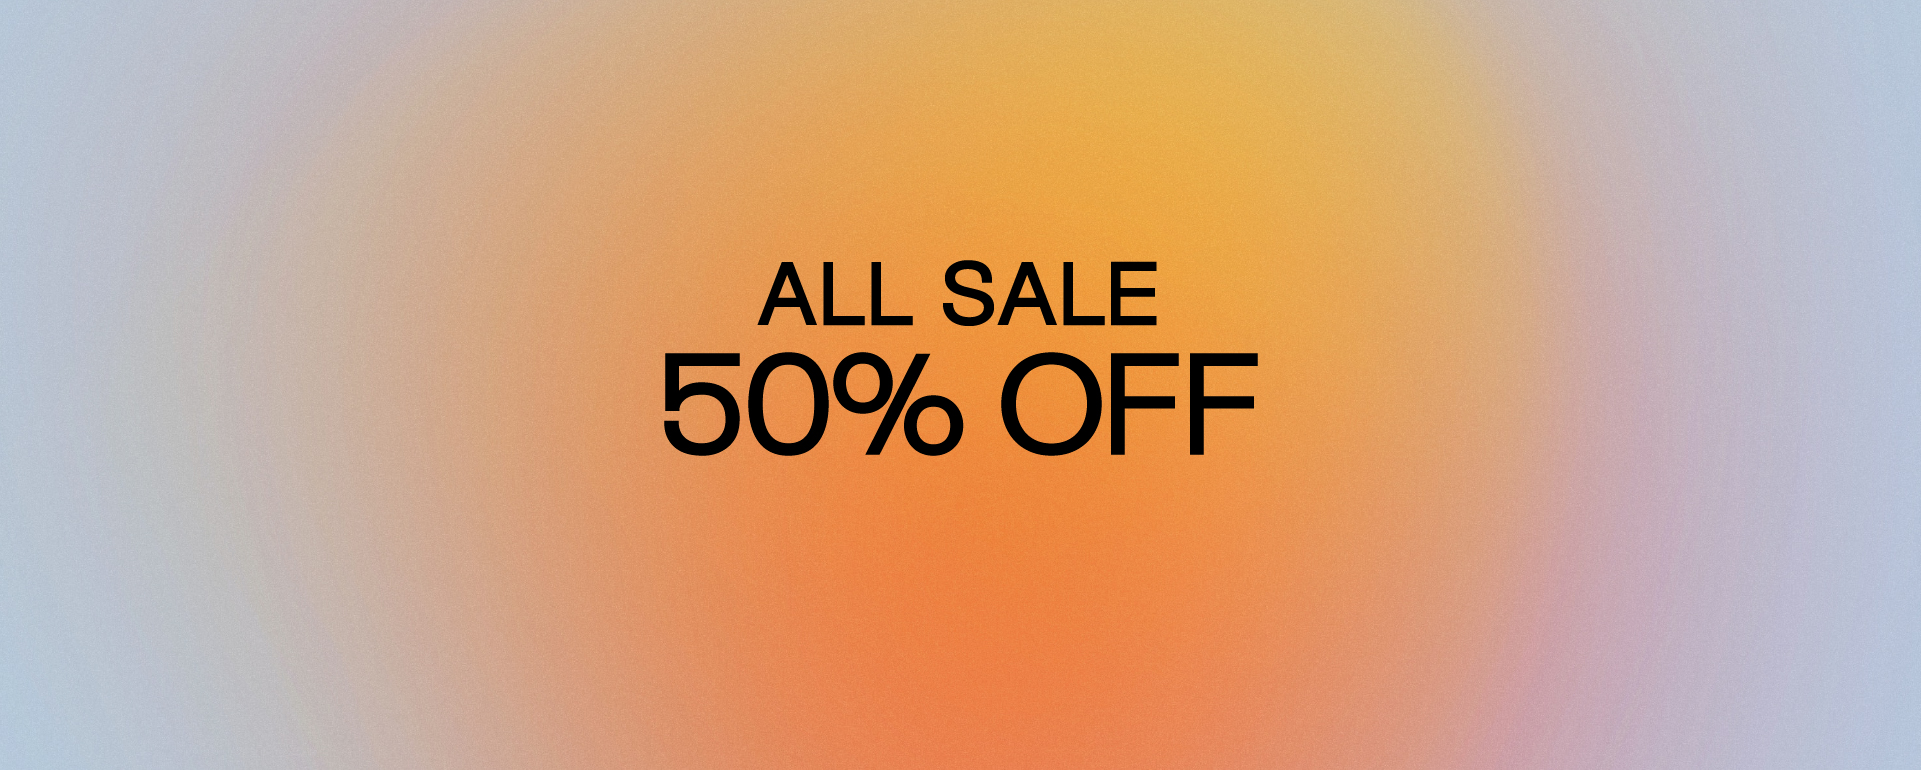 ALL SALE NOW 50% OFF